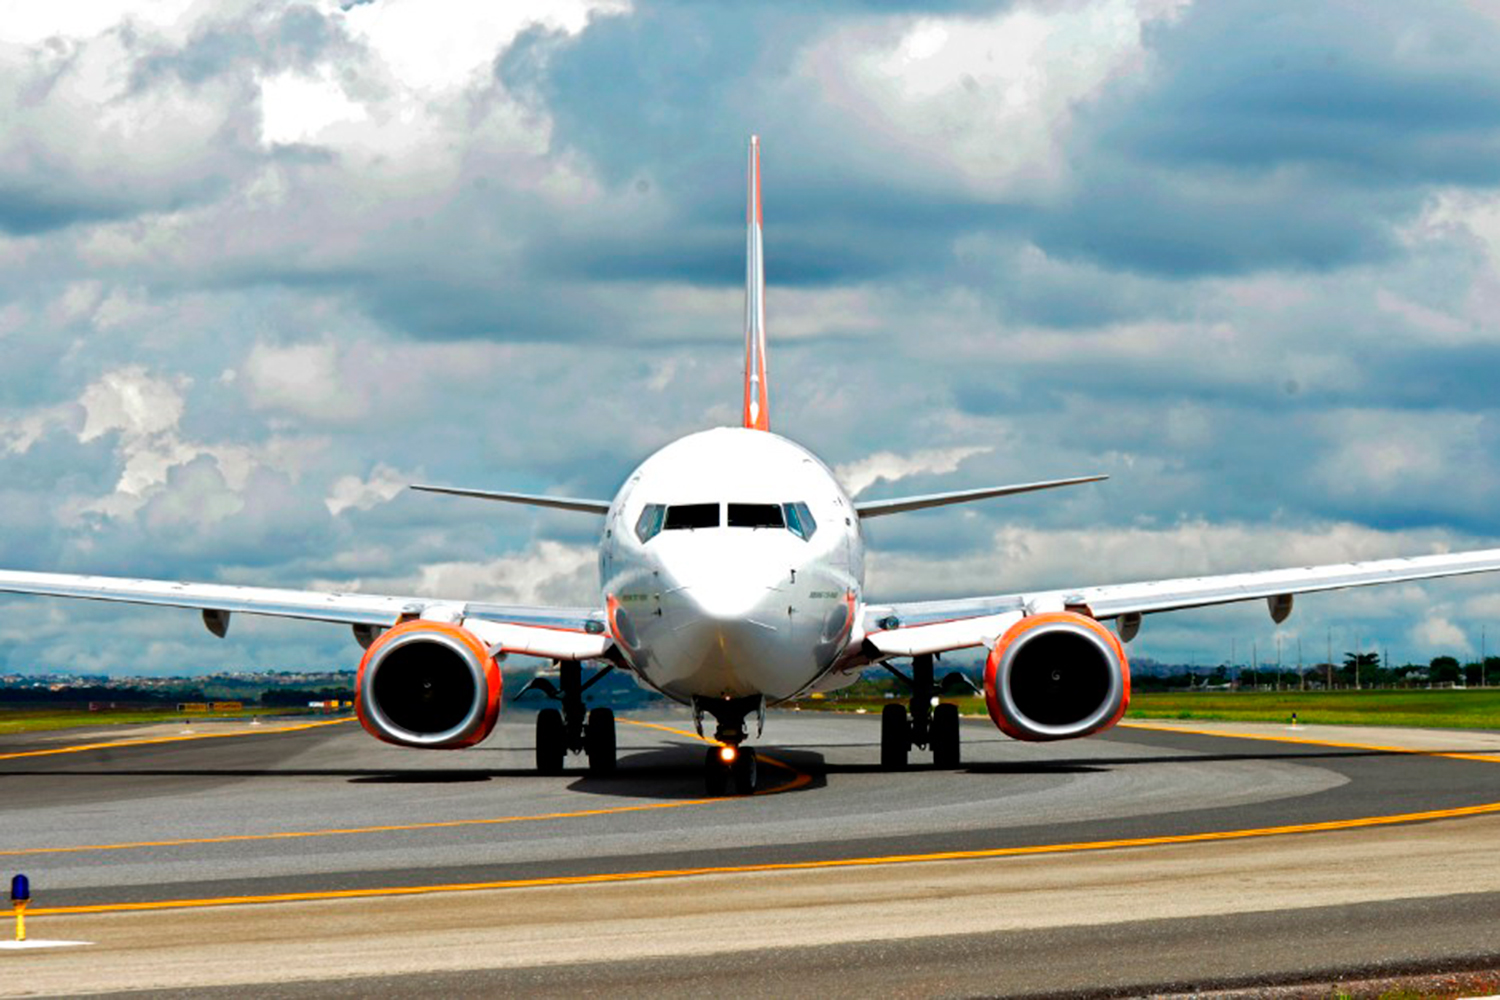 AIRPLANE ON THE RUNWAY - Privatization has improved the quality of services provided to companies and passengers -